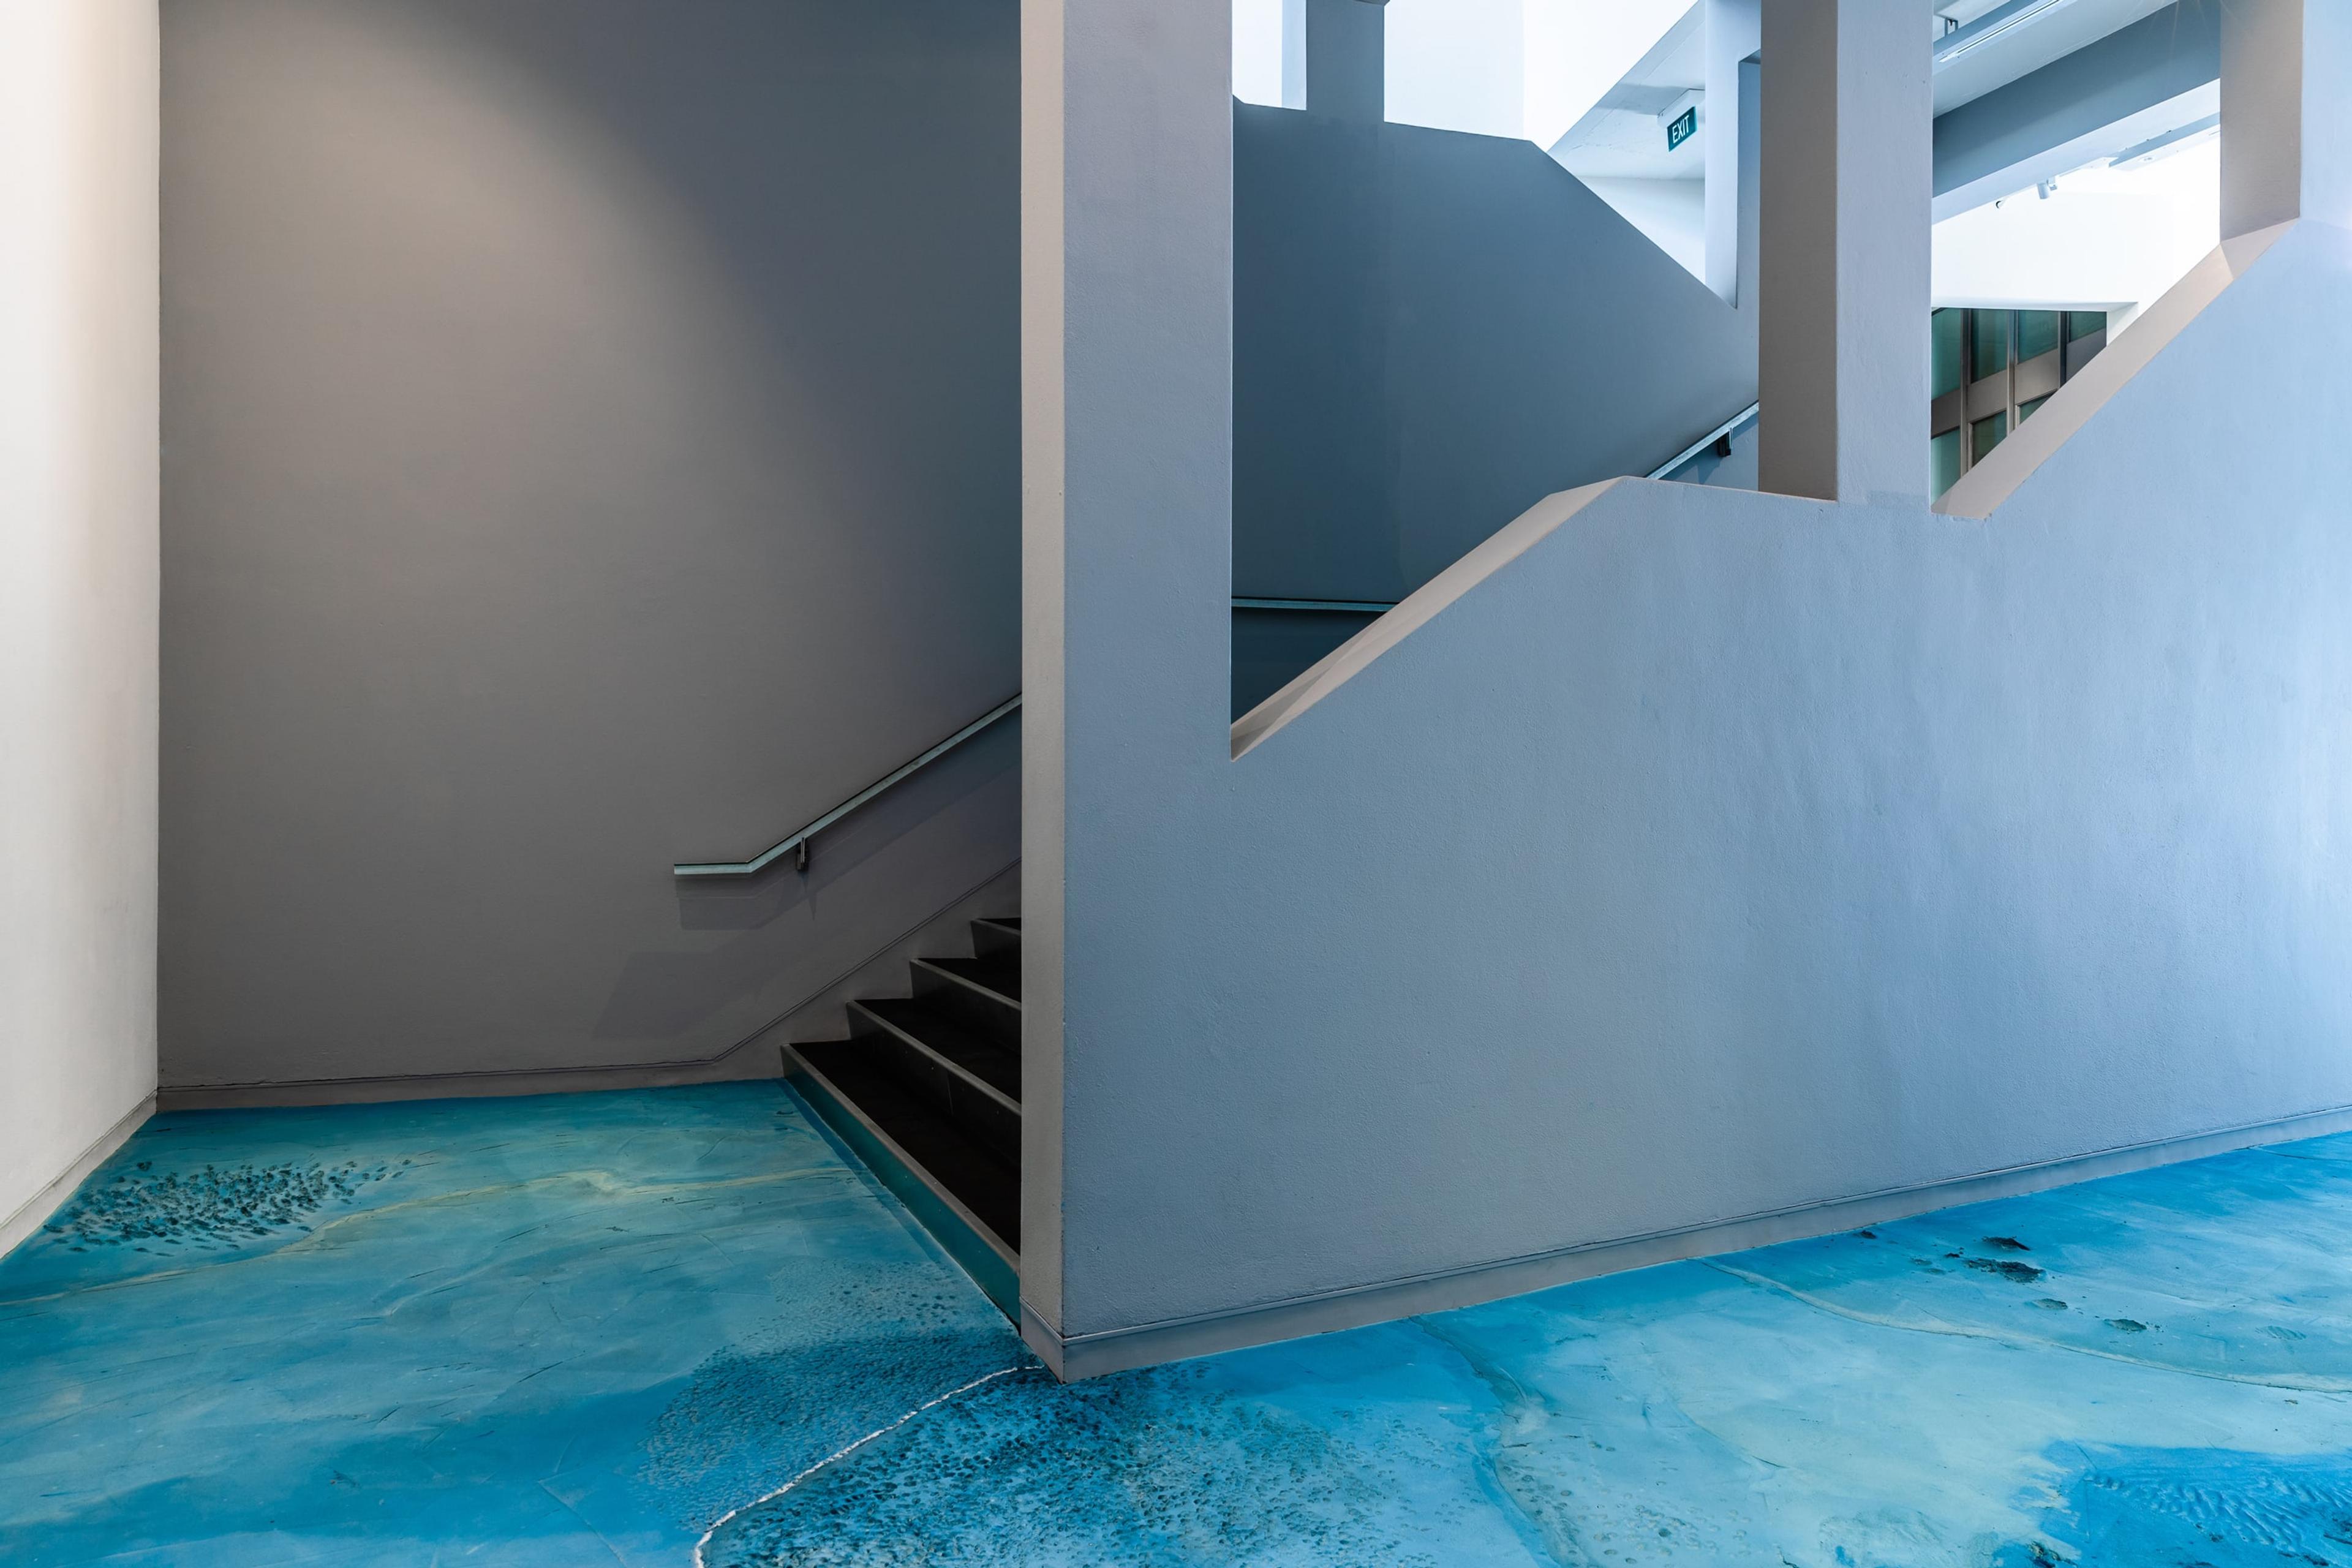 A view of a staircase in the gallery with grey walls and a textured blue floor